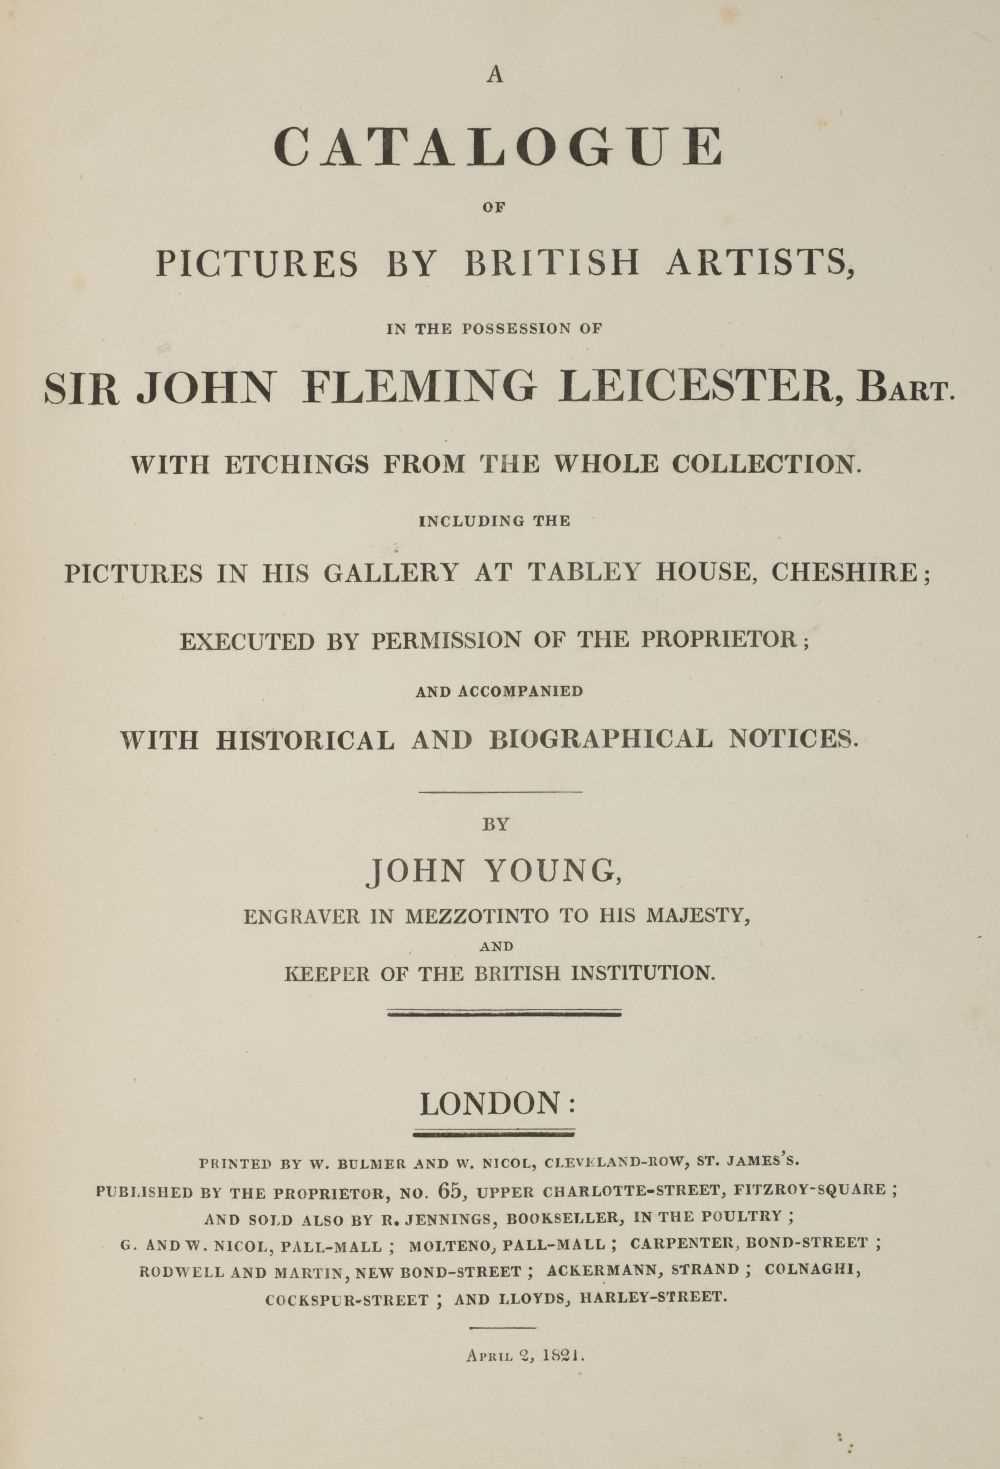 Lot 329 - Young (John). A Catalogue of Pictures by British Artists, 1821